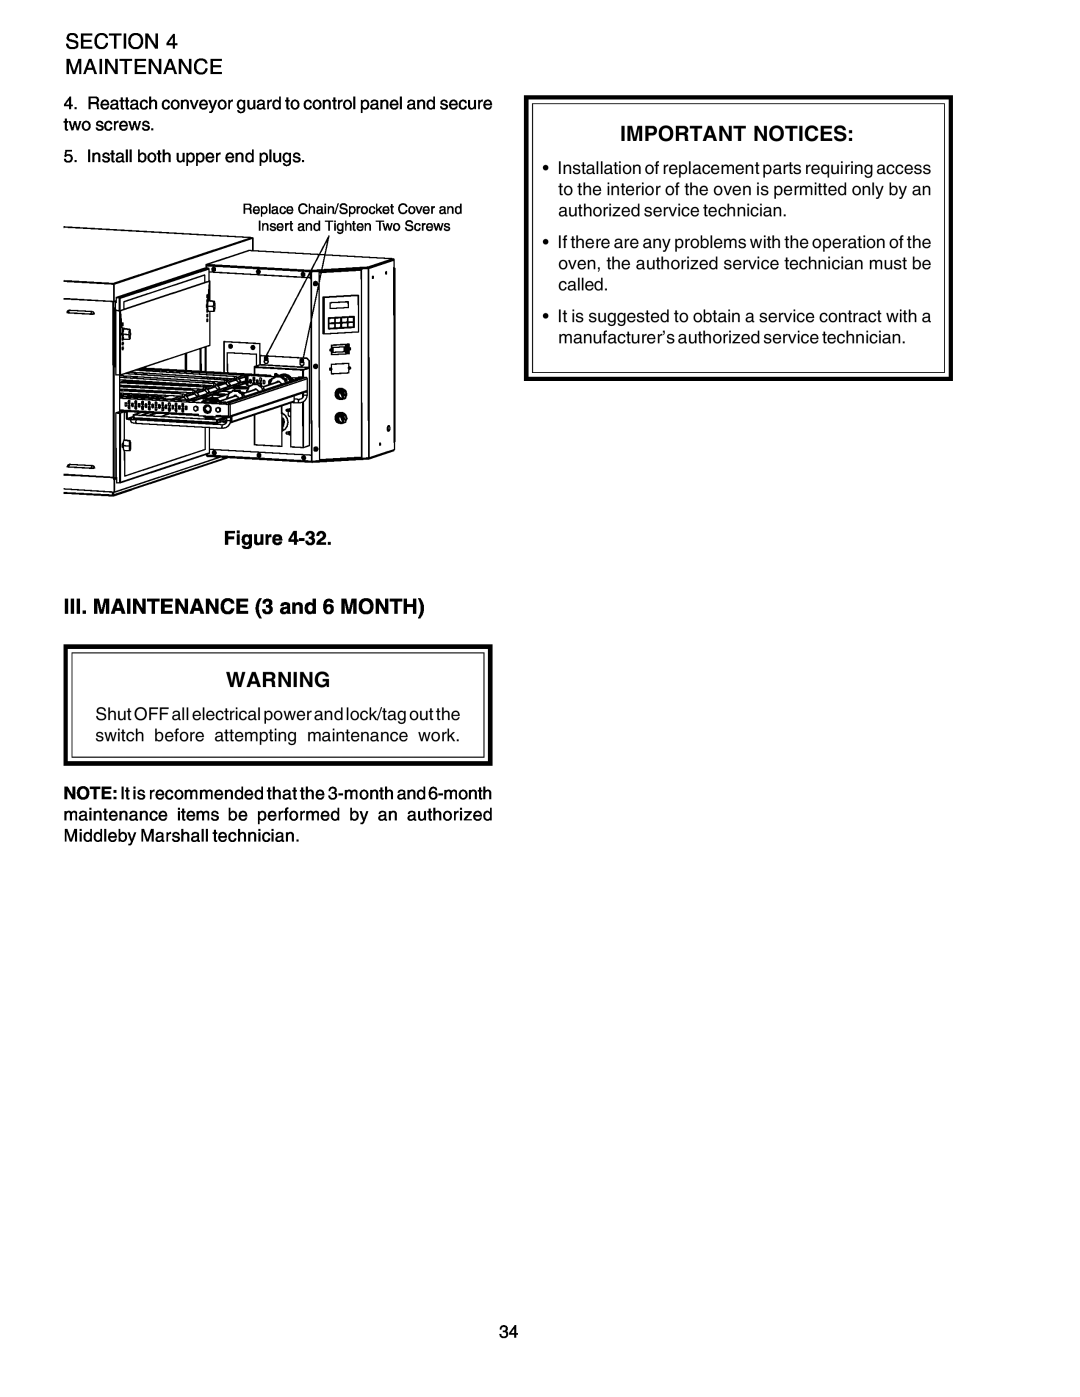 Middleby Marshall PS724E installation manual Important Notices, III. MAINTENANCE 3 and 6 MONTH, Section Maintenance 